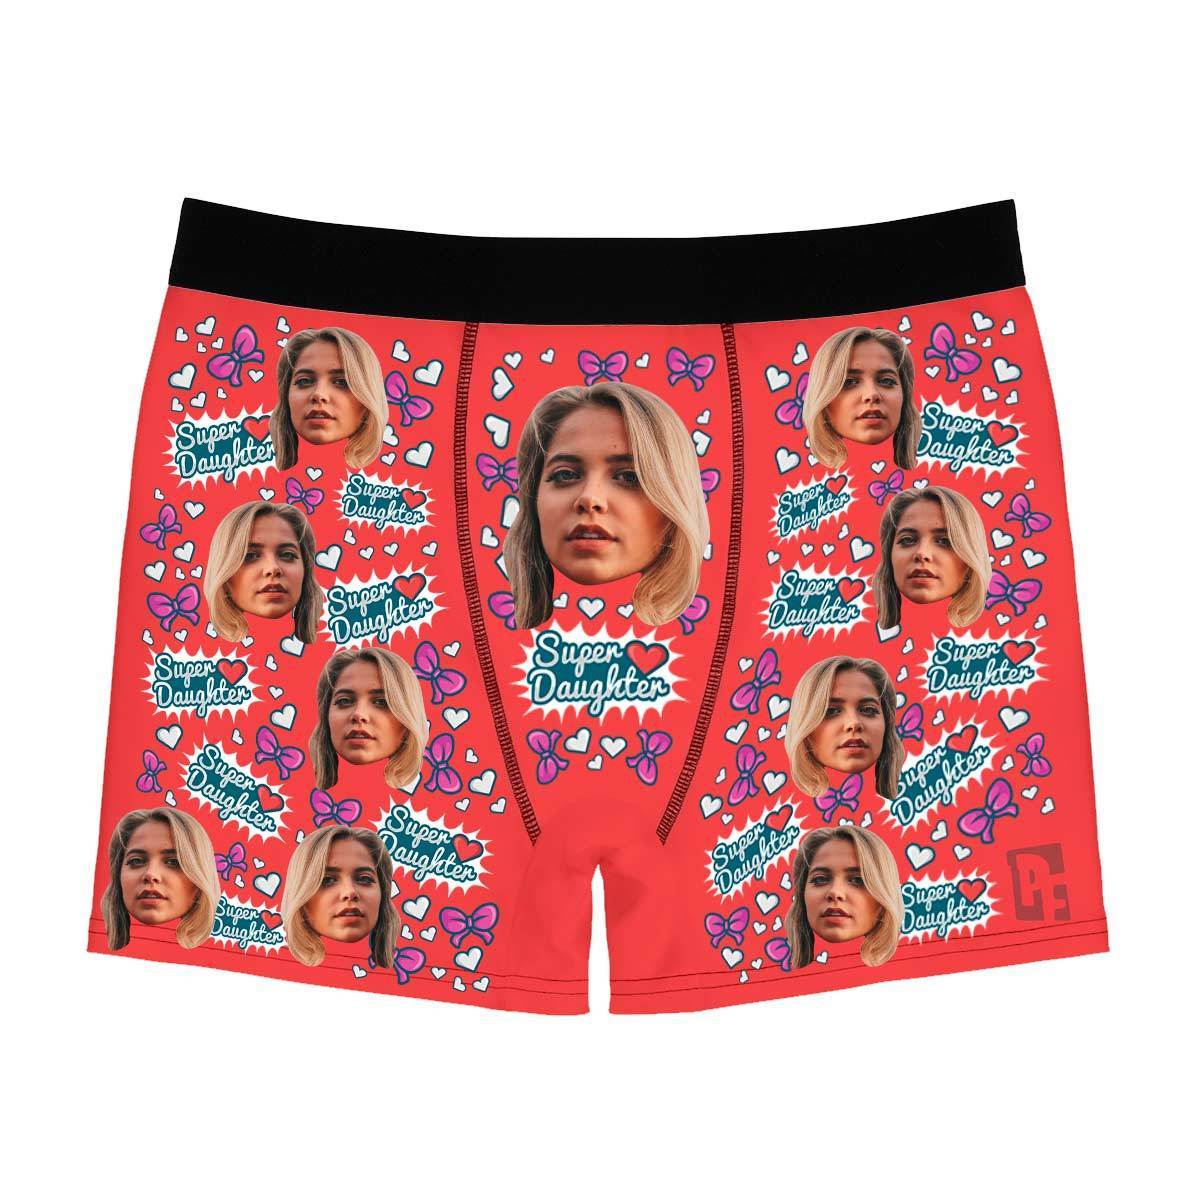 Red Super daughter men's boxer briefs personalized with photo printed on them